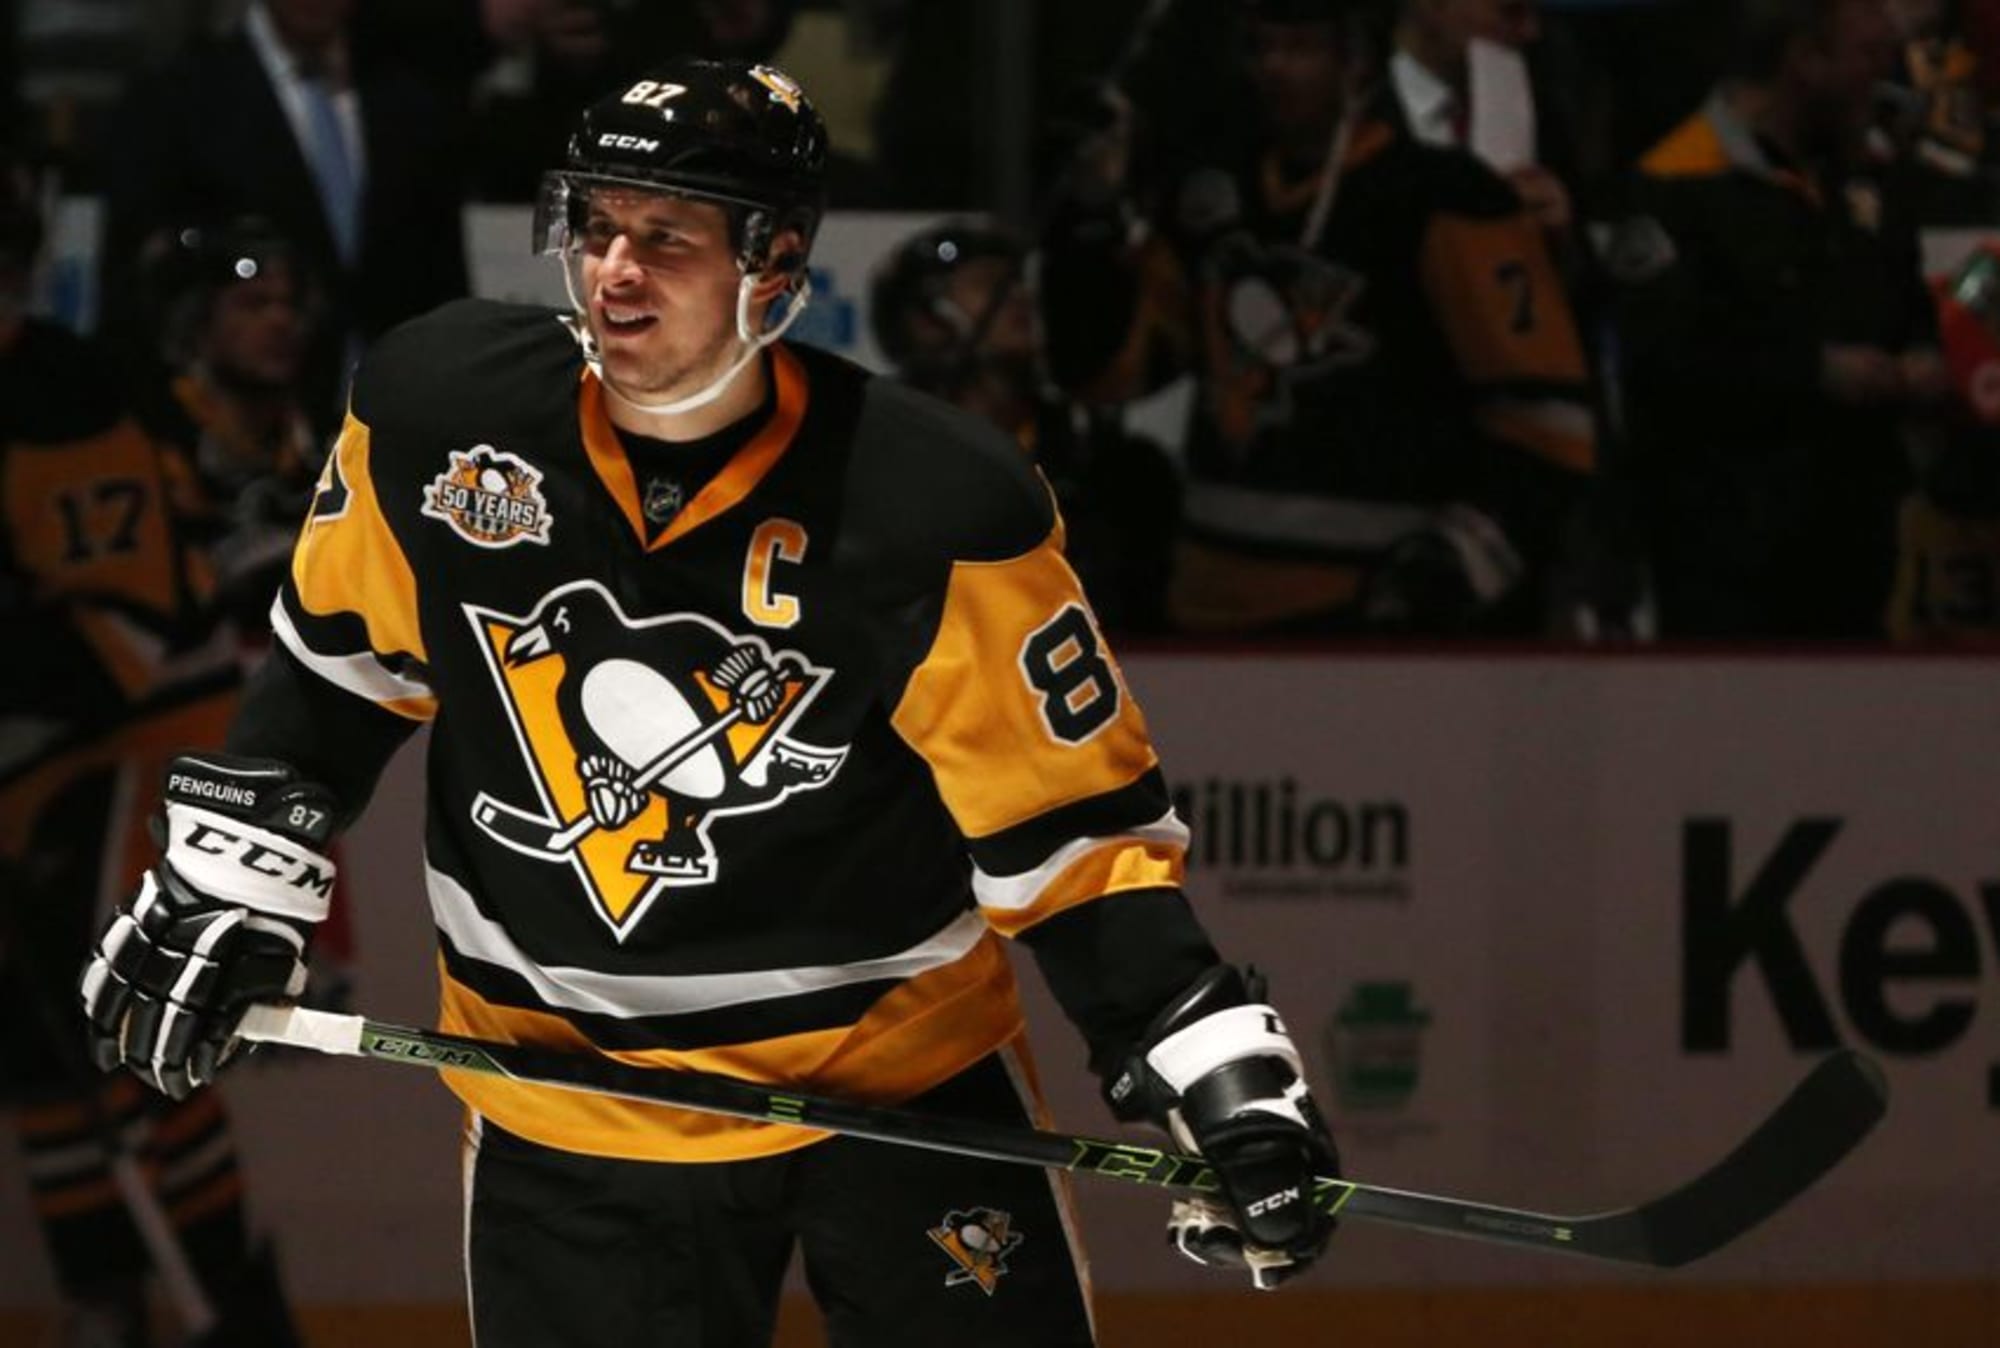 Sidney Crosby entertains at NHL All-Star Skills Competition